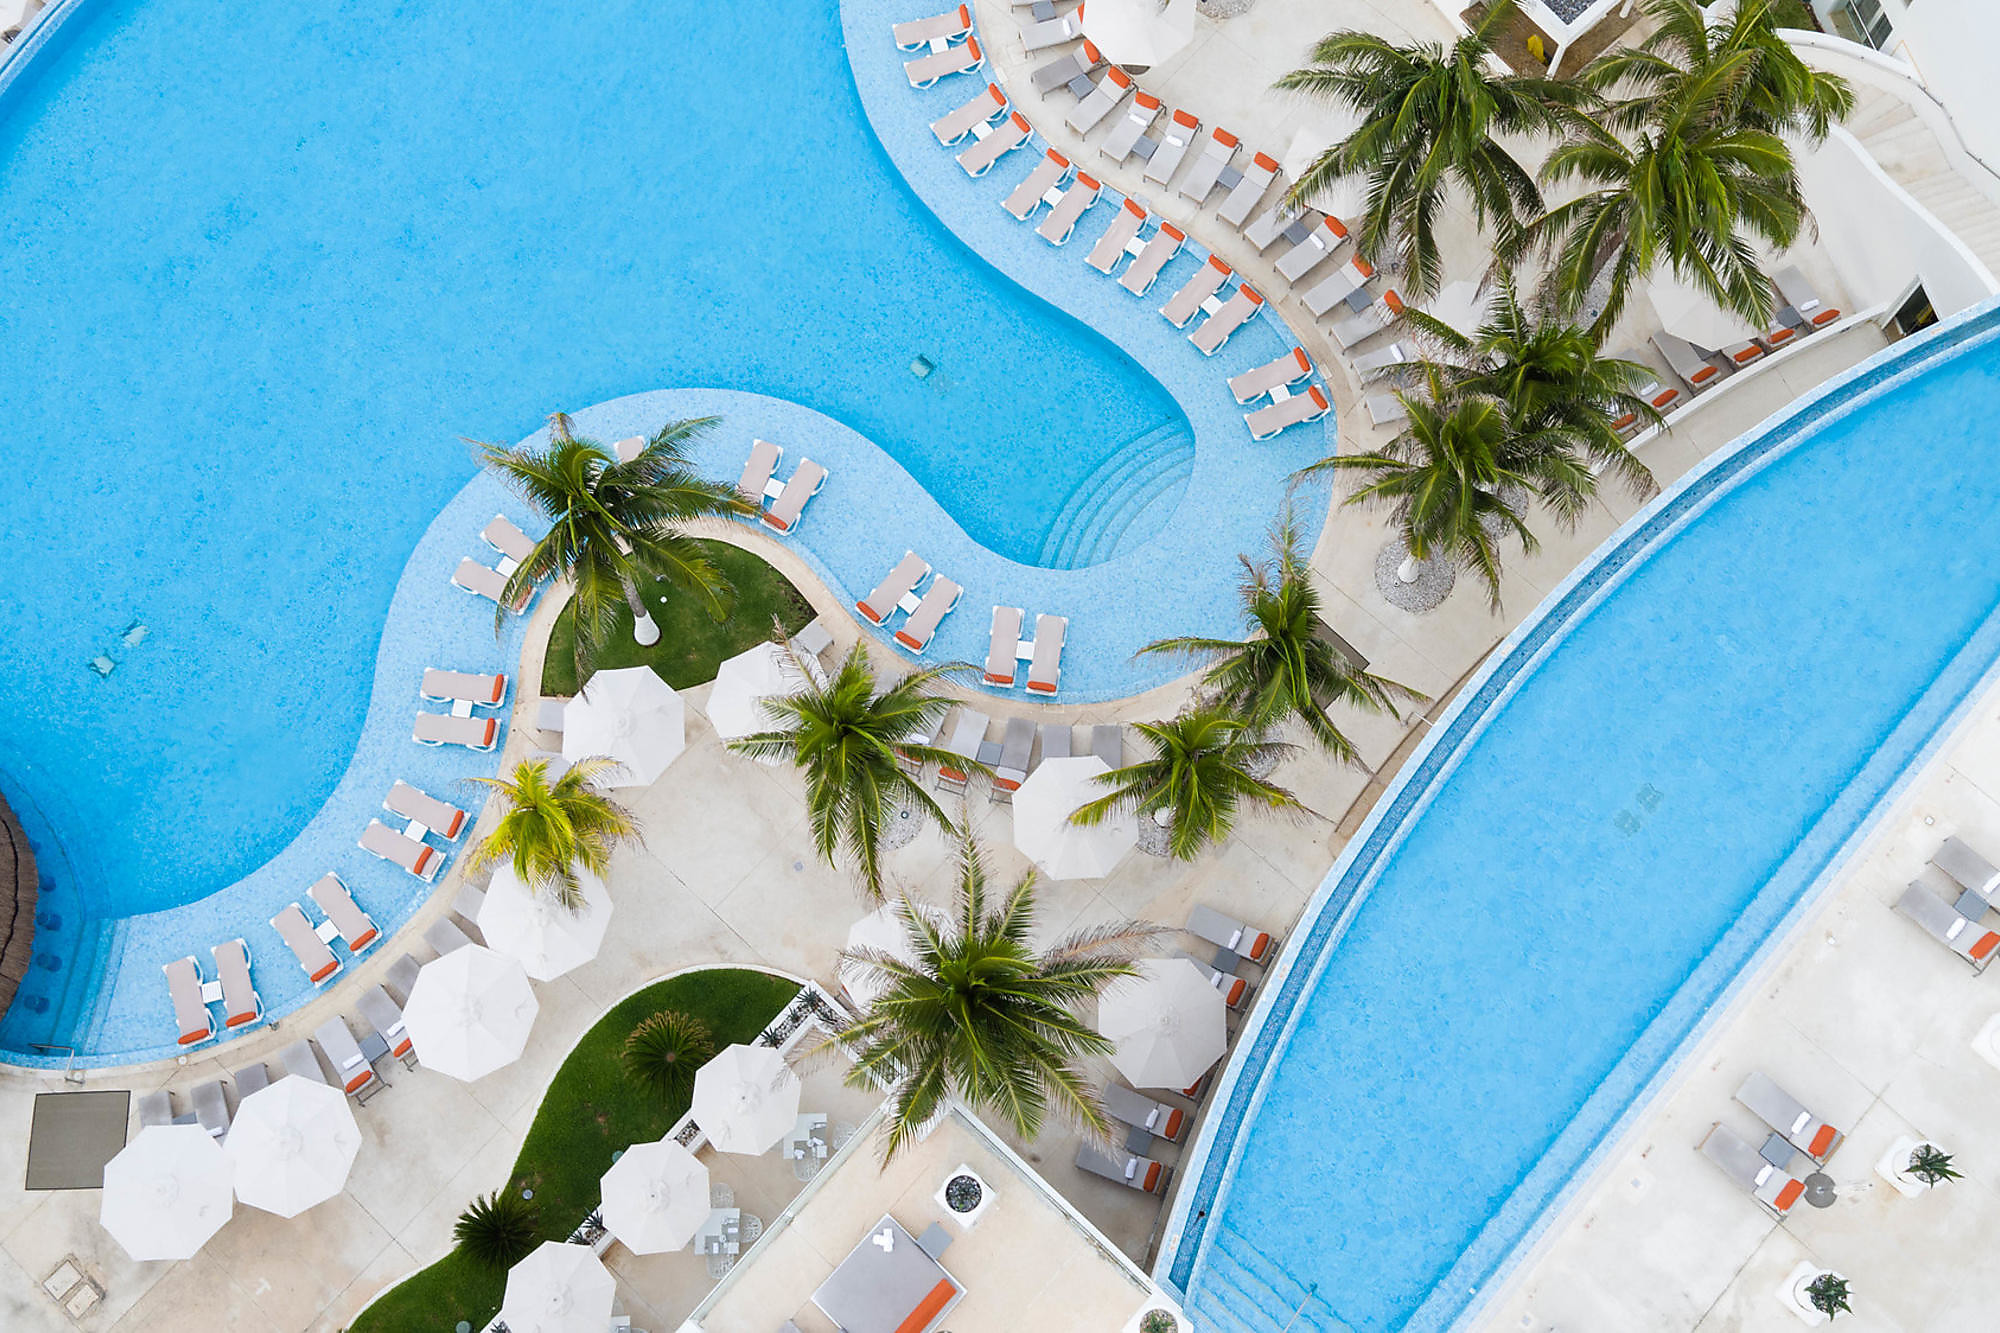 The pools at Le Blanc Spa Resort Cancun